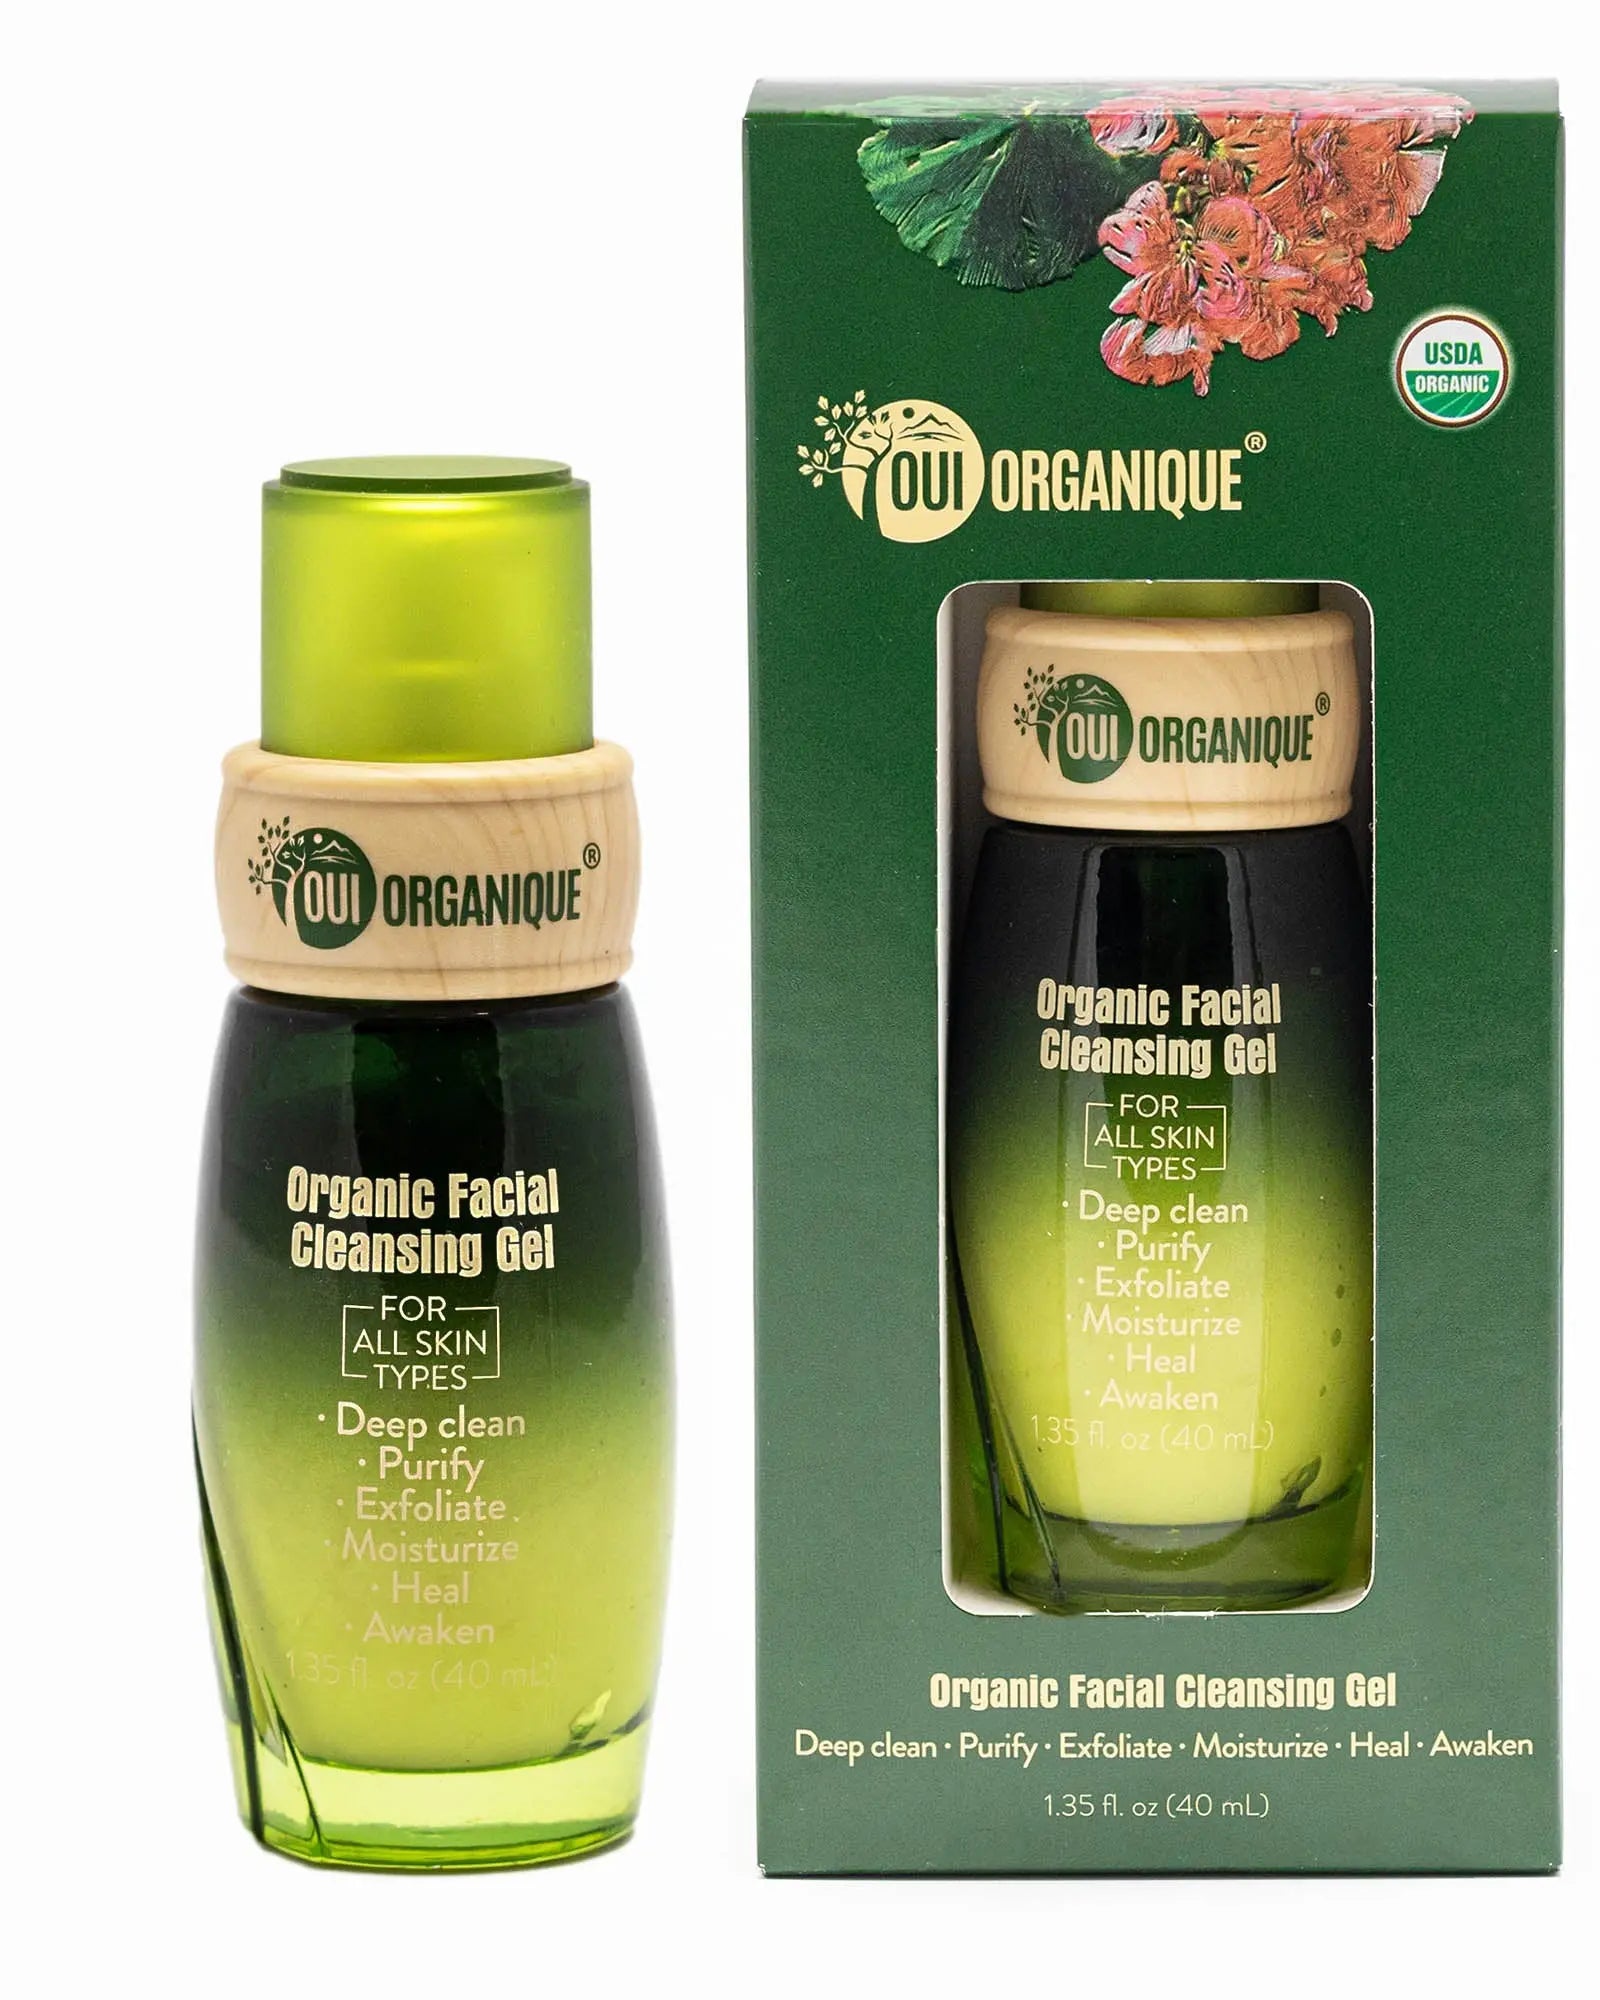 Certified Organic Facial Cleansing Gel with Geranium Oil for all skin types | sensitive skin OUI ORGANIQUE